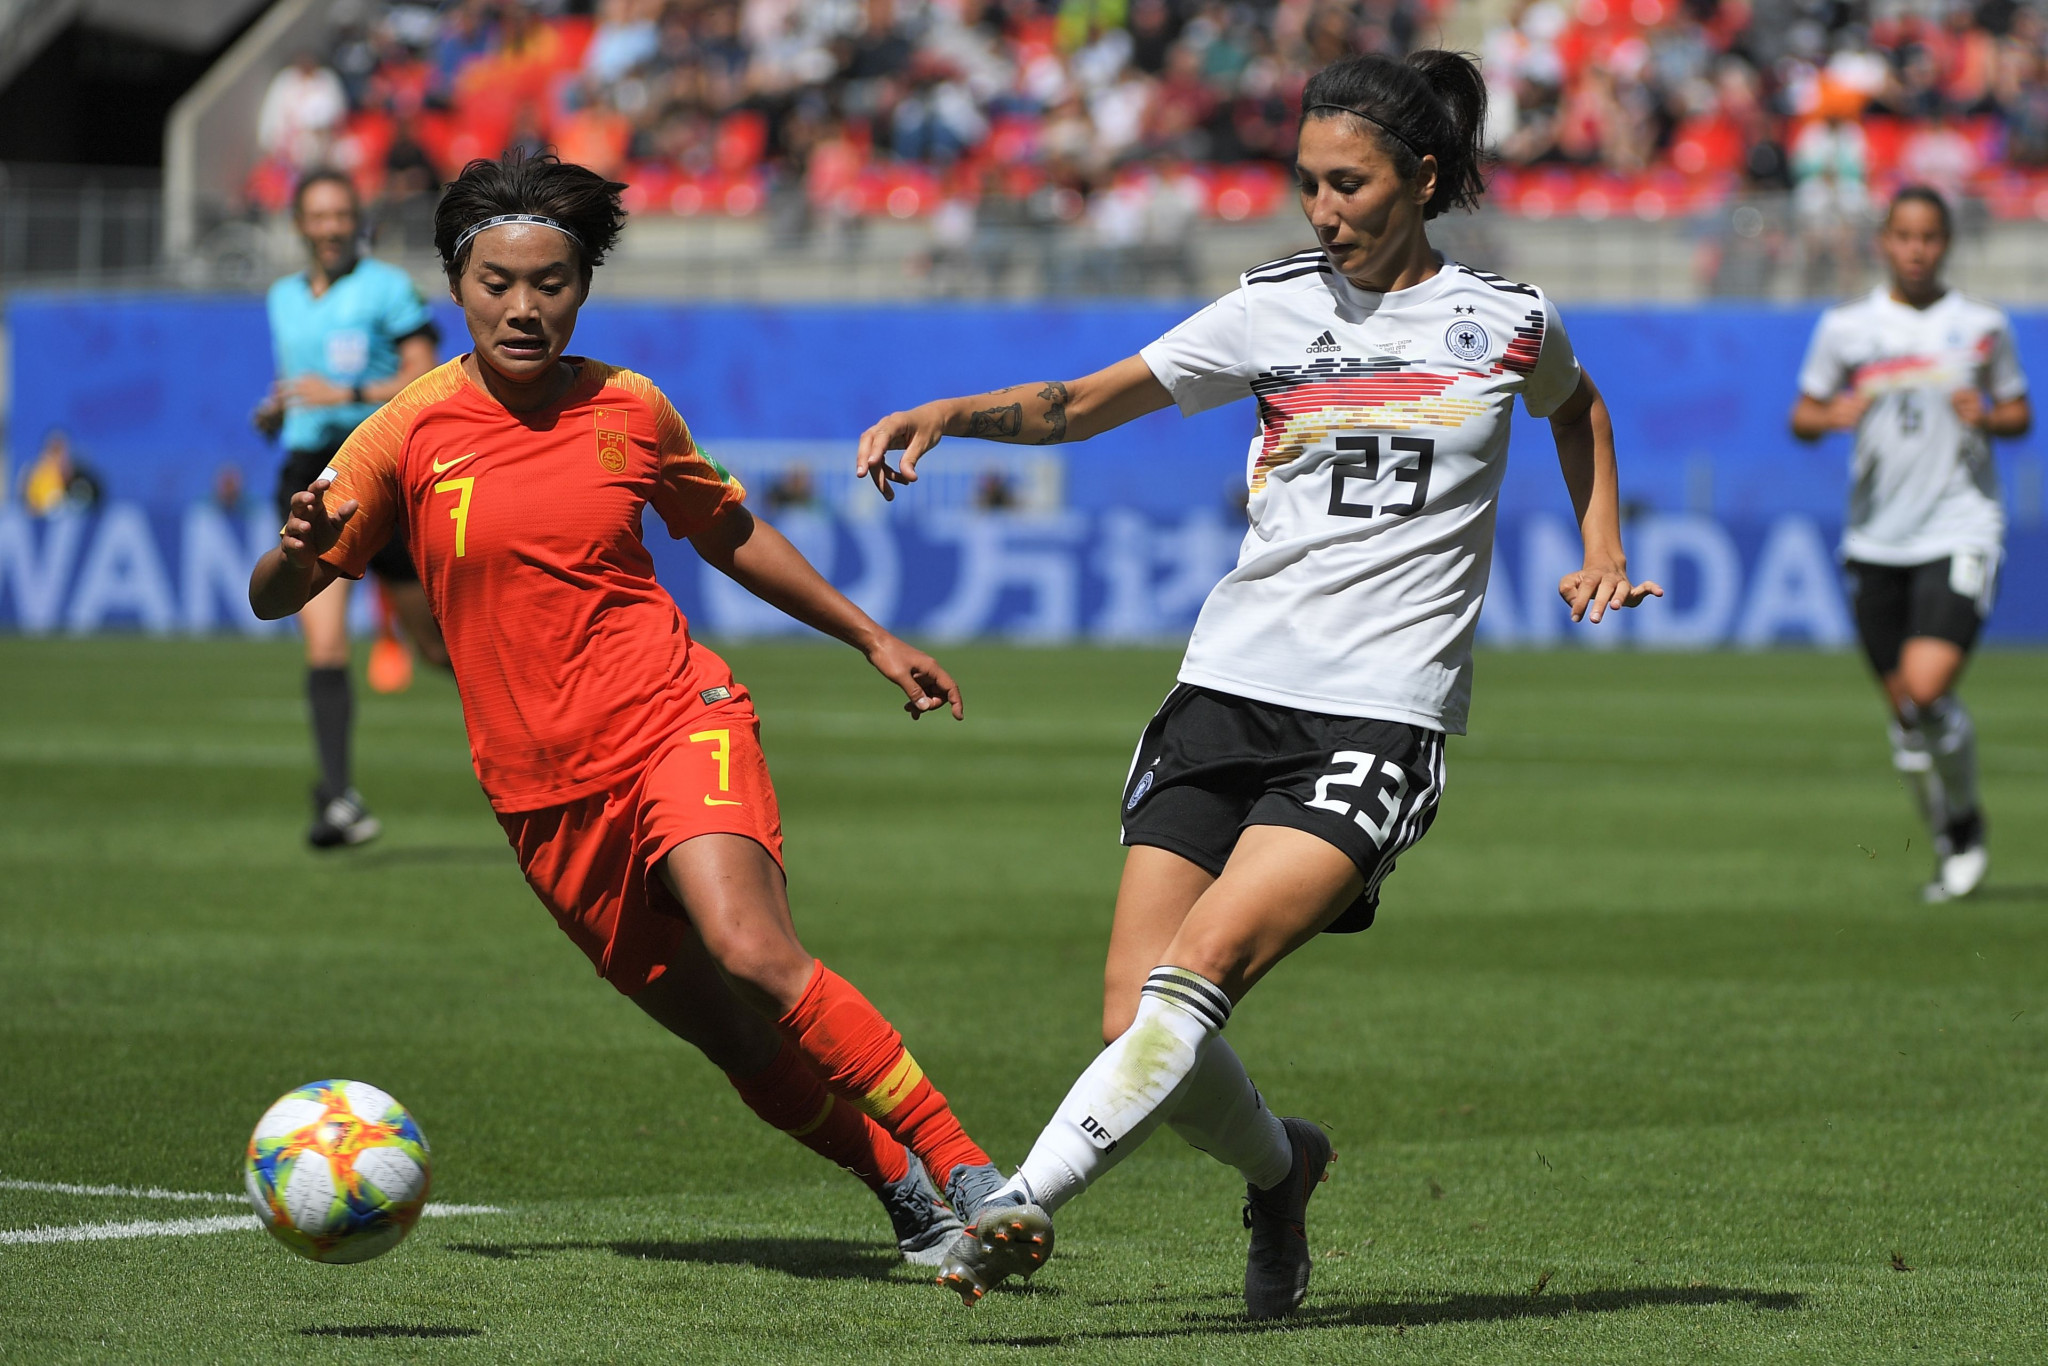 Olympic champions Germany secure unconvincing opening win at FIFA Women's World Cup